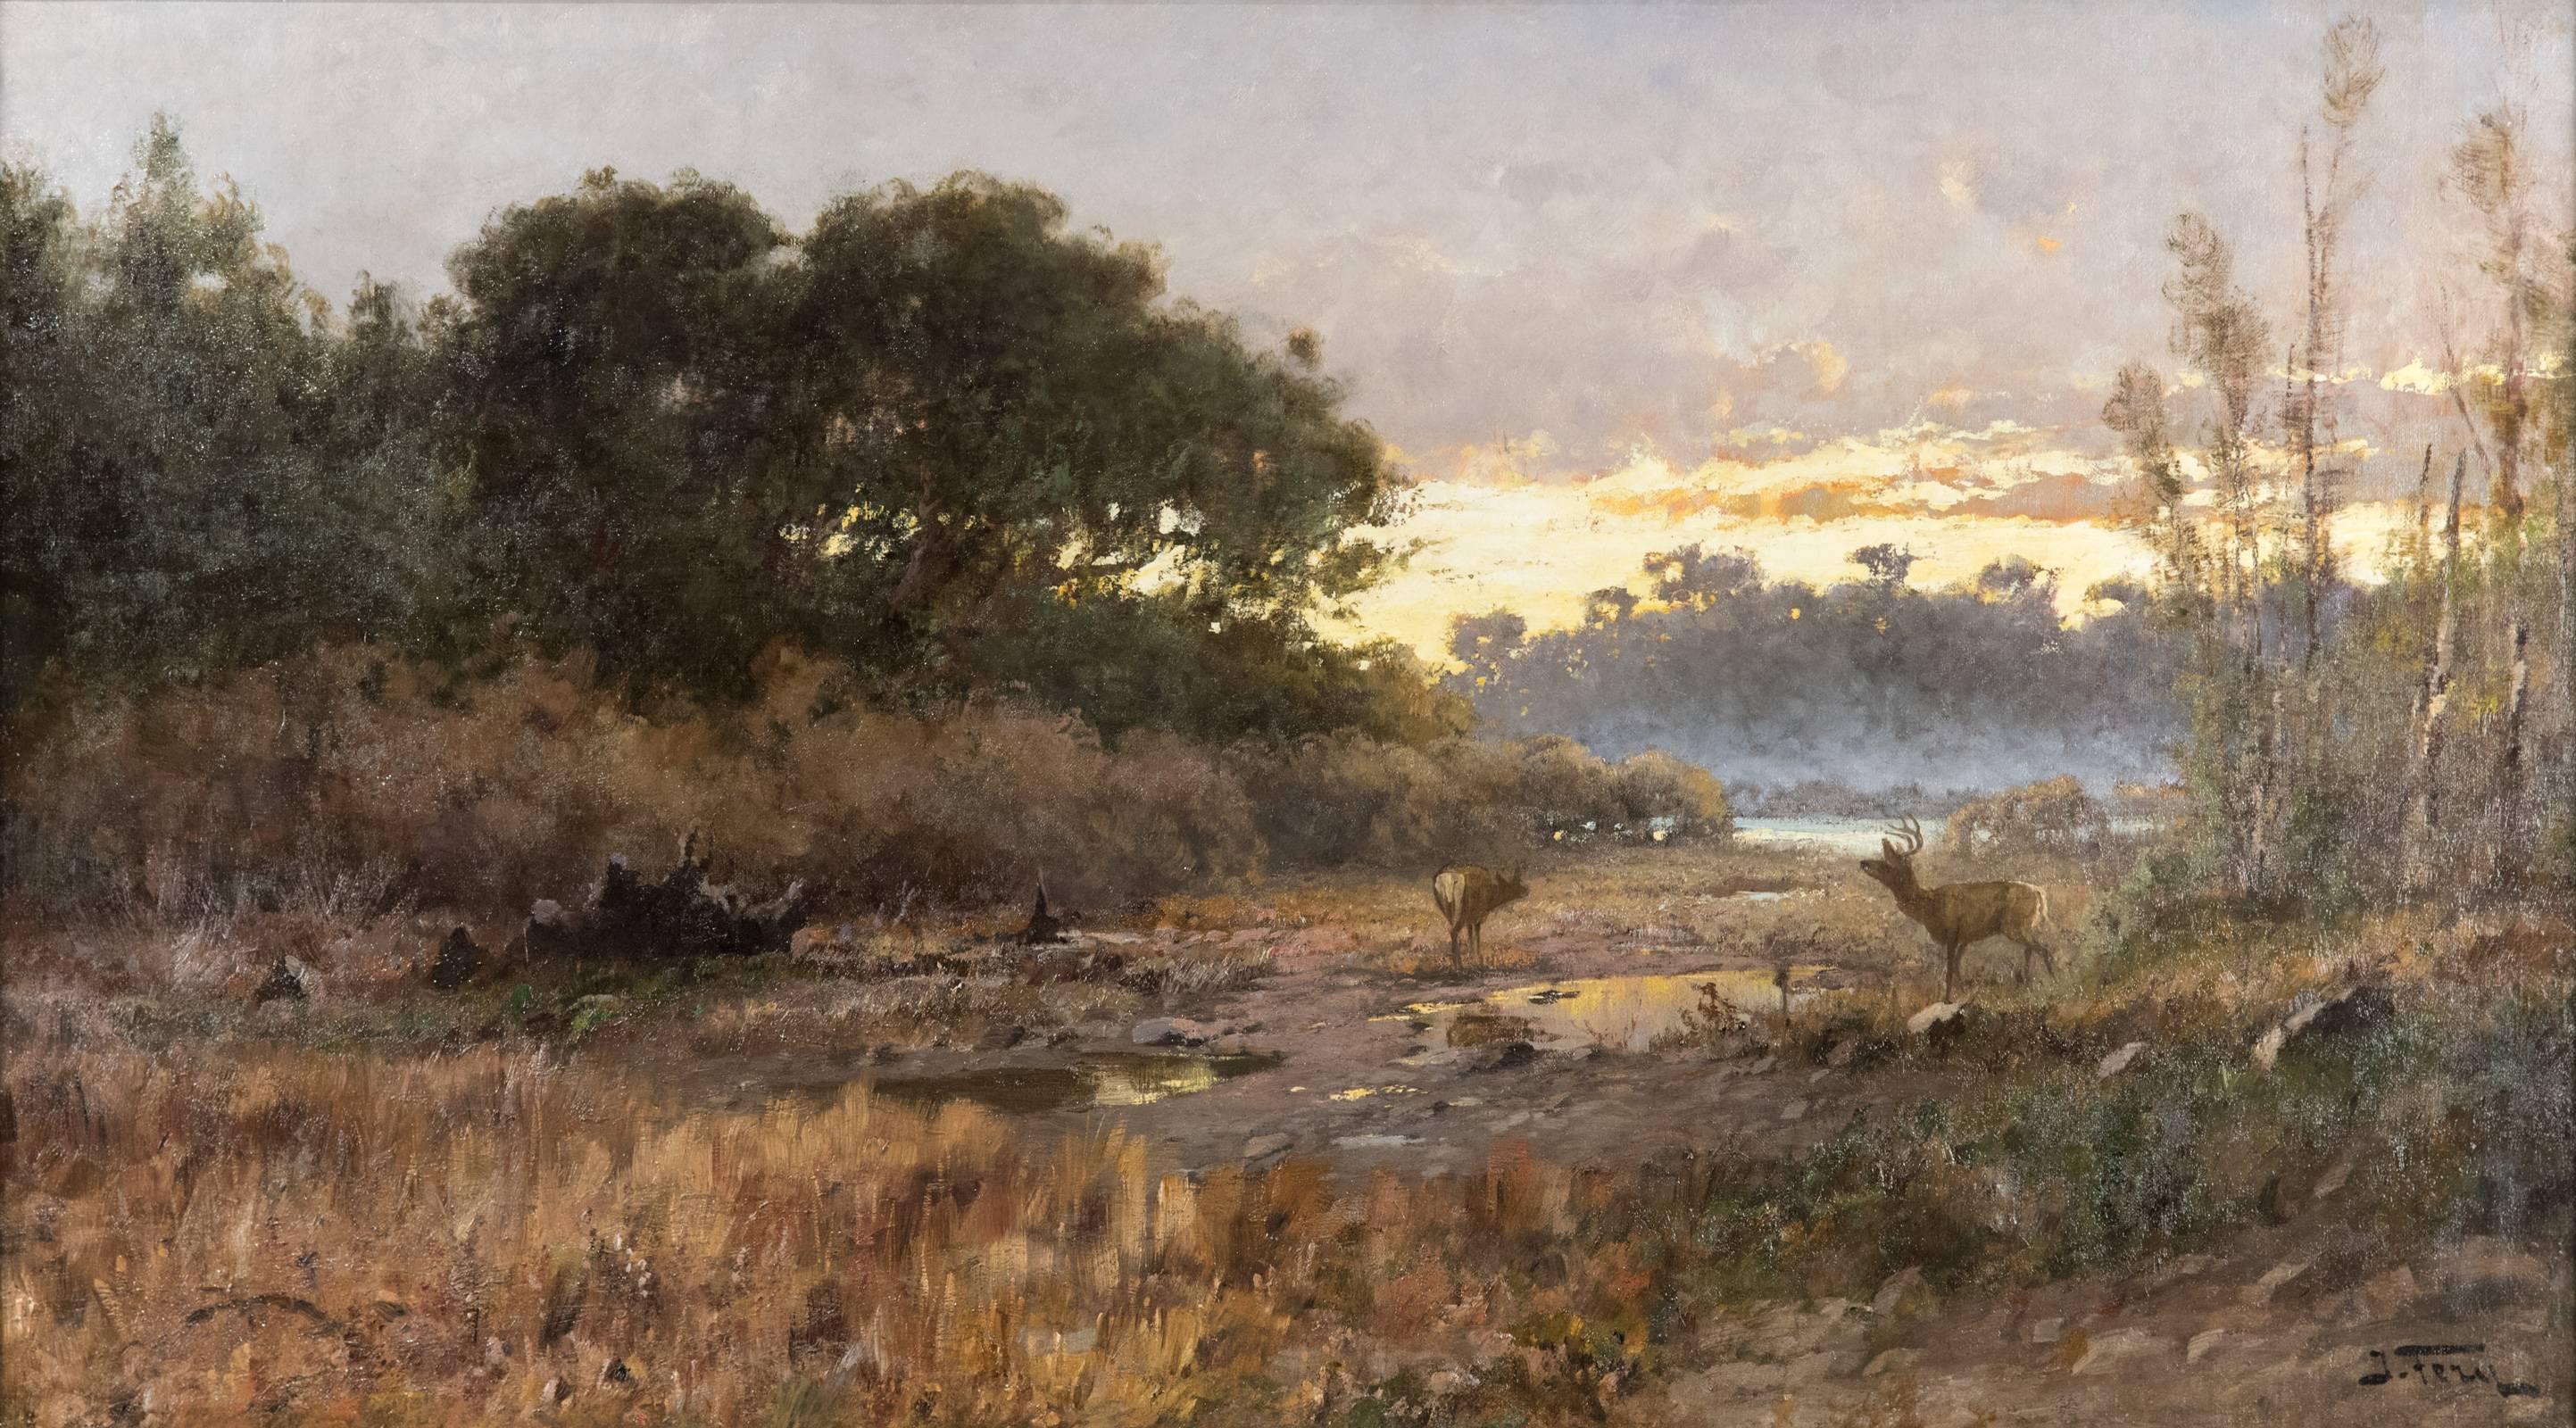 Golden light fills the sky, reflecting off pools of water from which deer drink within the marches, as the sun sets in this serene painting by John Fery (1859-1934). The relaxed, broad brushstrokes of this impressive panoramic landscape painting are